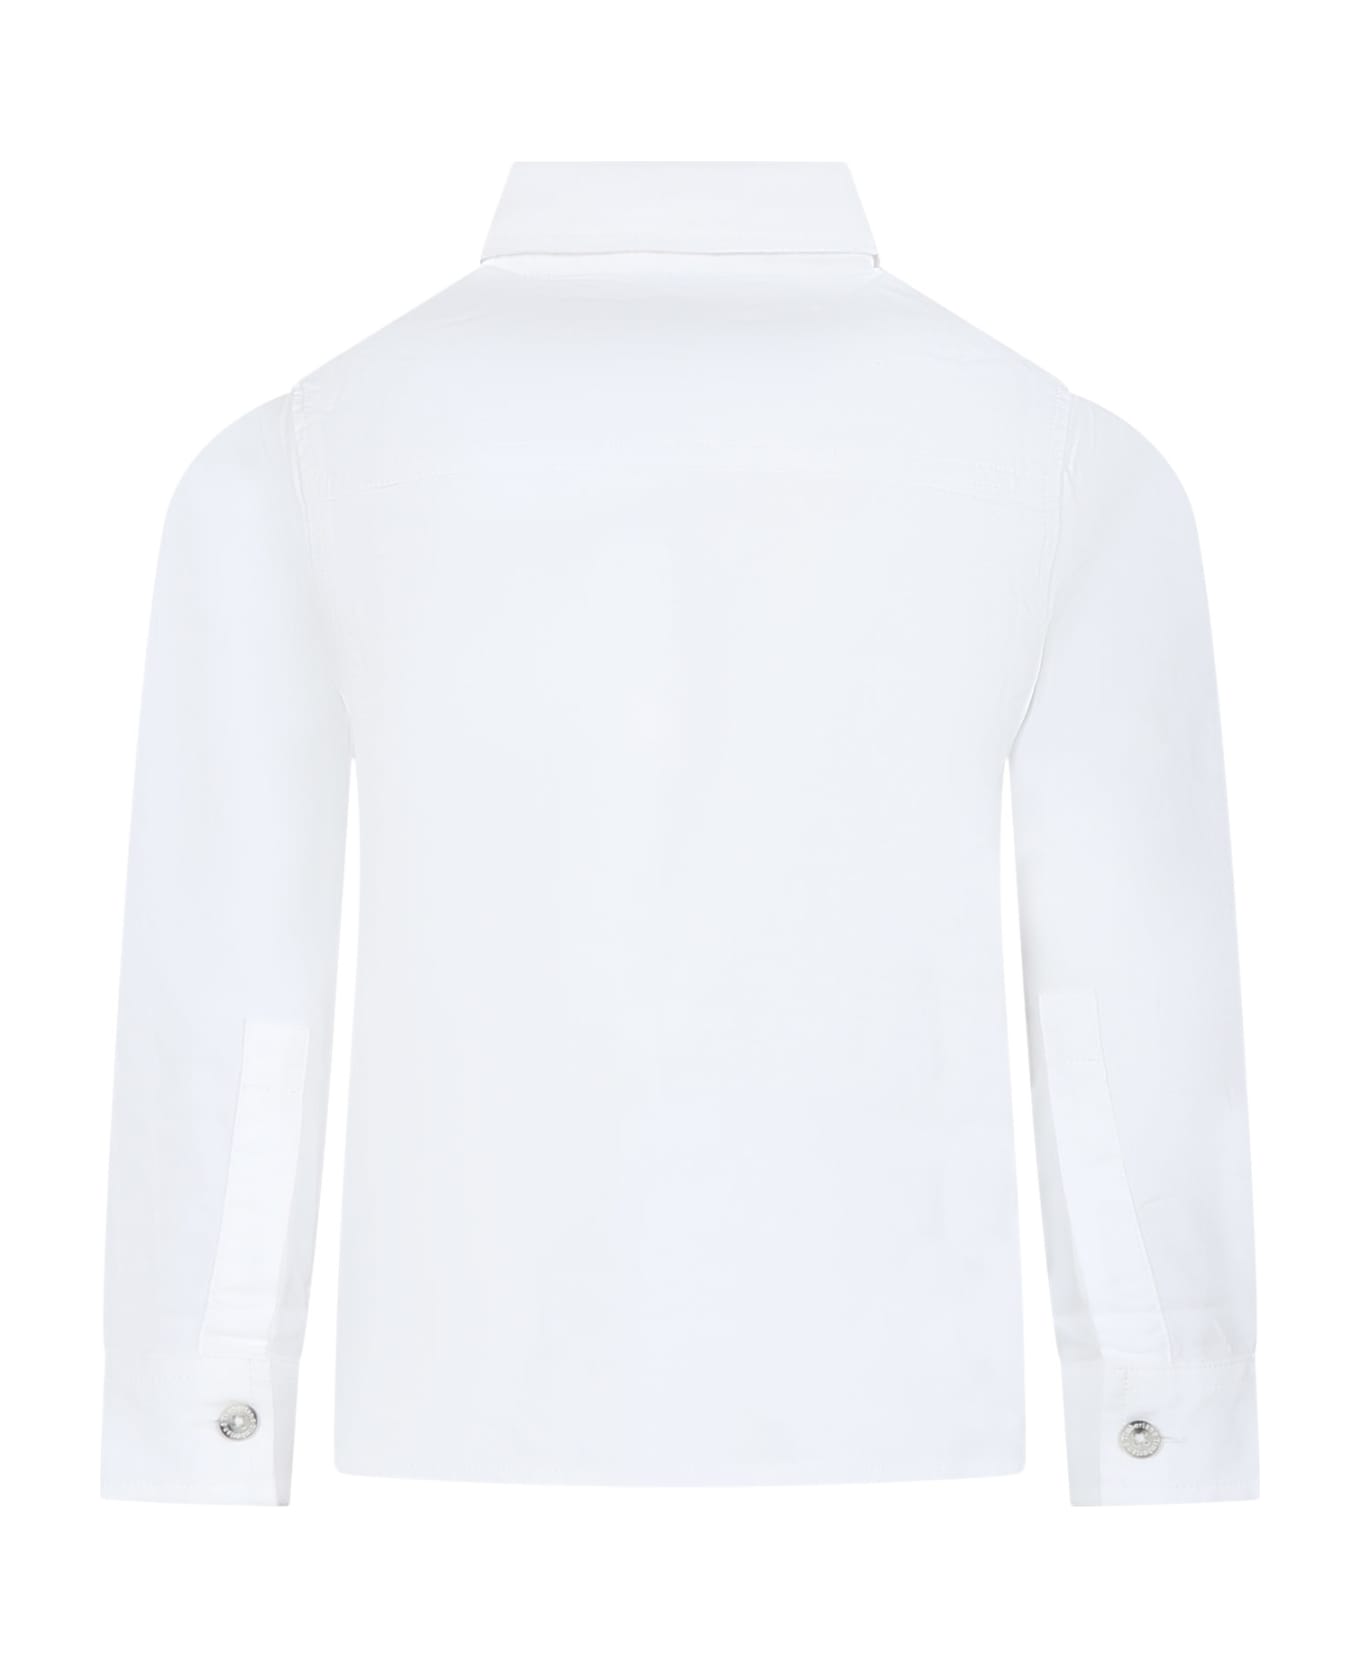 Timberland White Shirt For Boy With Logo - White シャツ